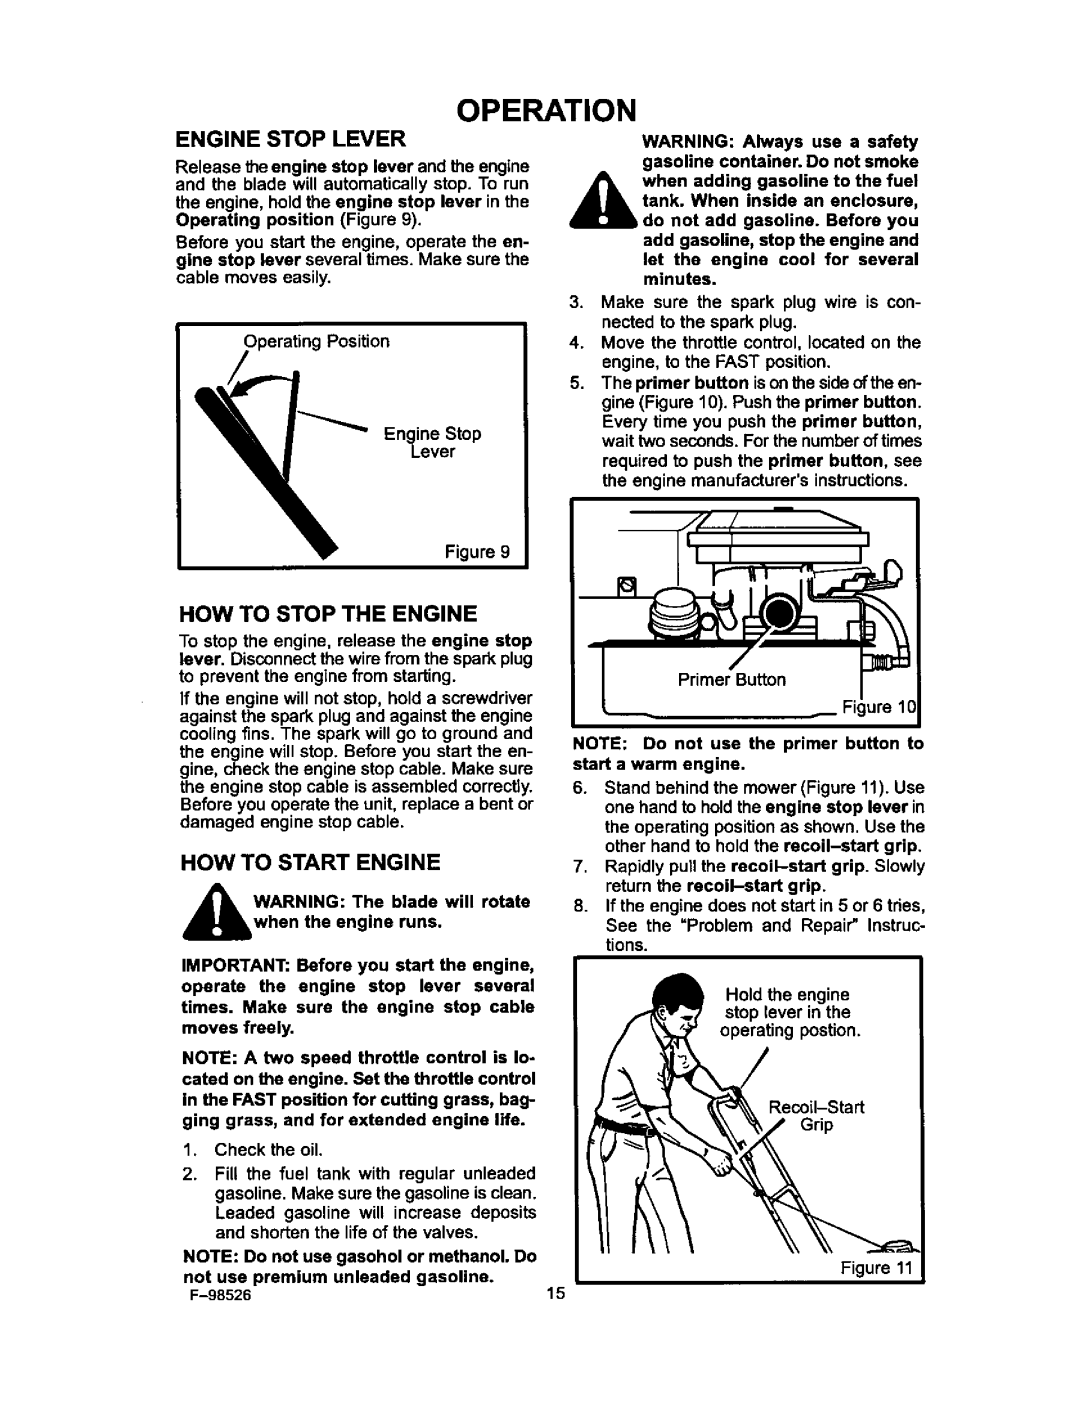 Murray 22506x9A, F-98526 manual Operation, Engine Stop Lever, How To Stop The Engine, How To Start Engine 